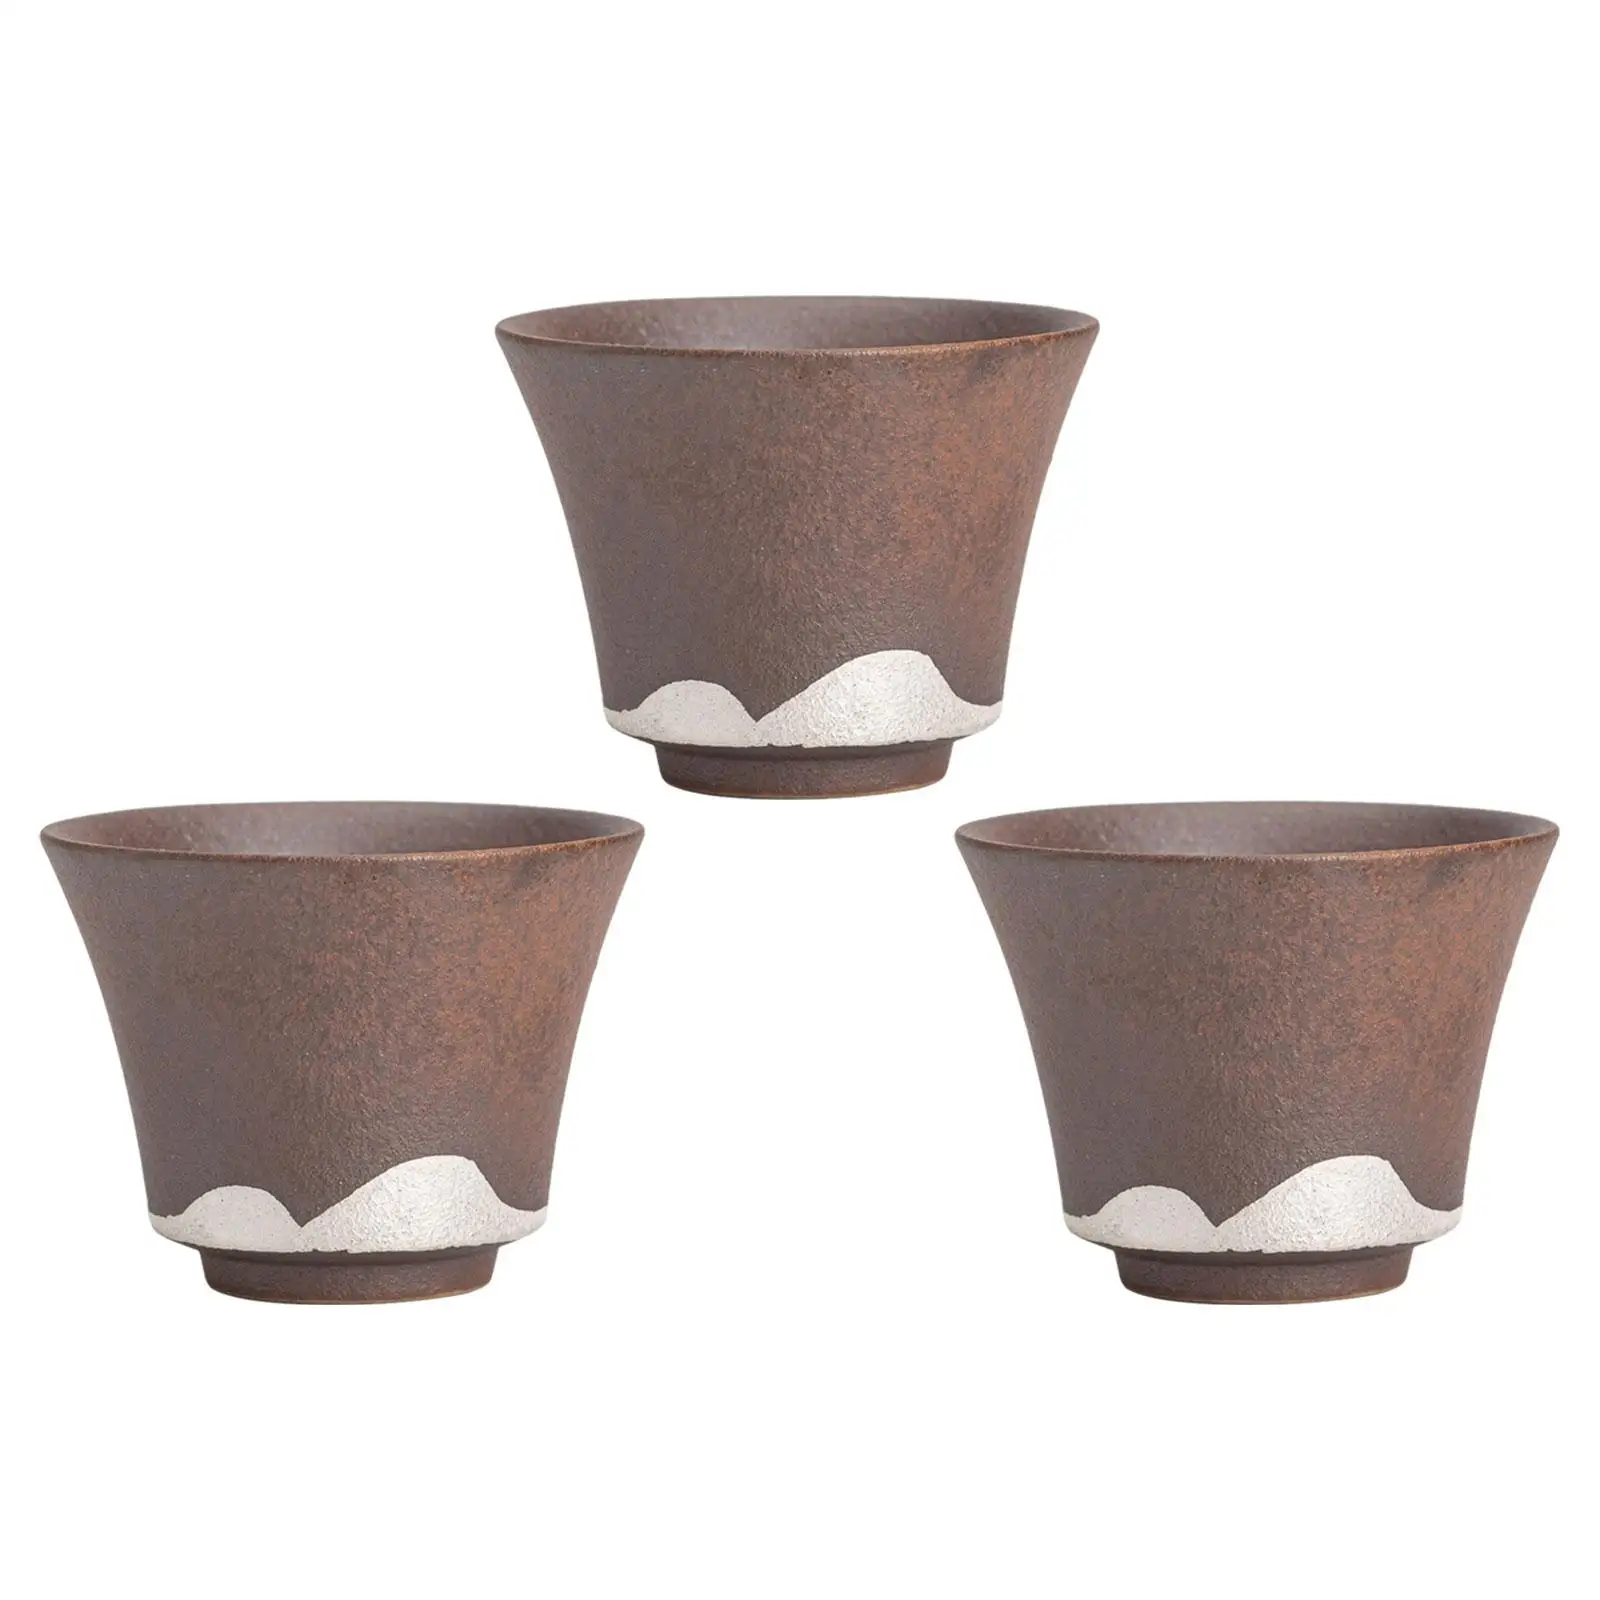 3Pcs Ceramic Tea Cup Set Cup Traditional Tea Kettles Coffee Cup without Handles for Picnic Kitchen Hiking Household